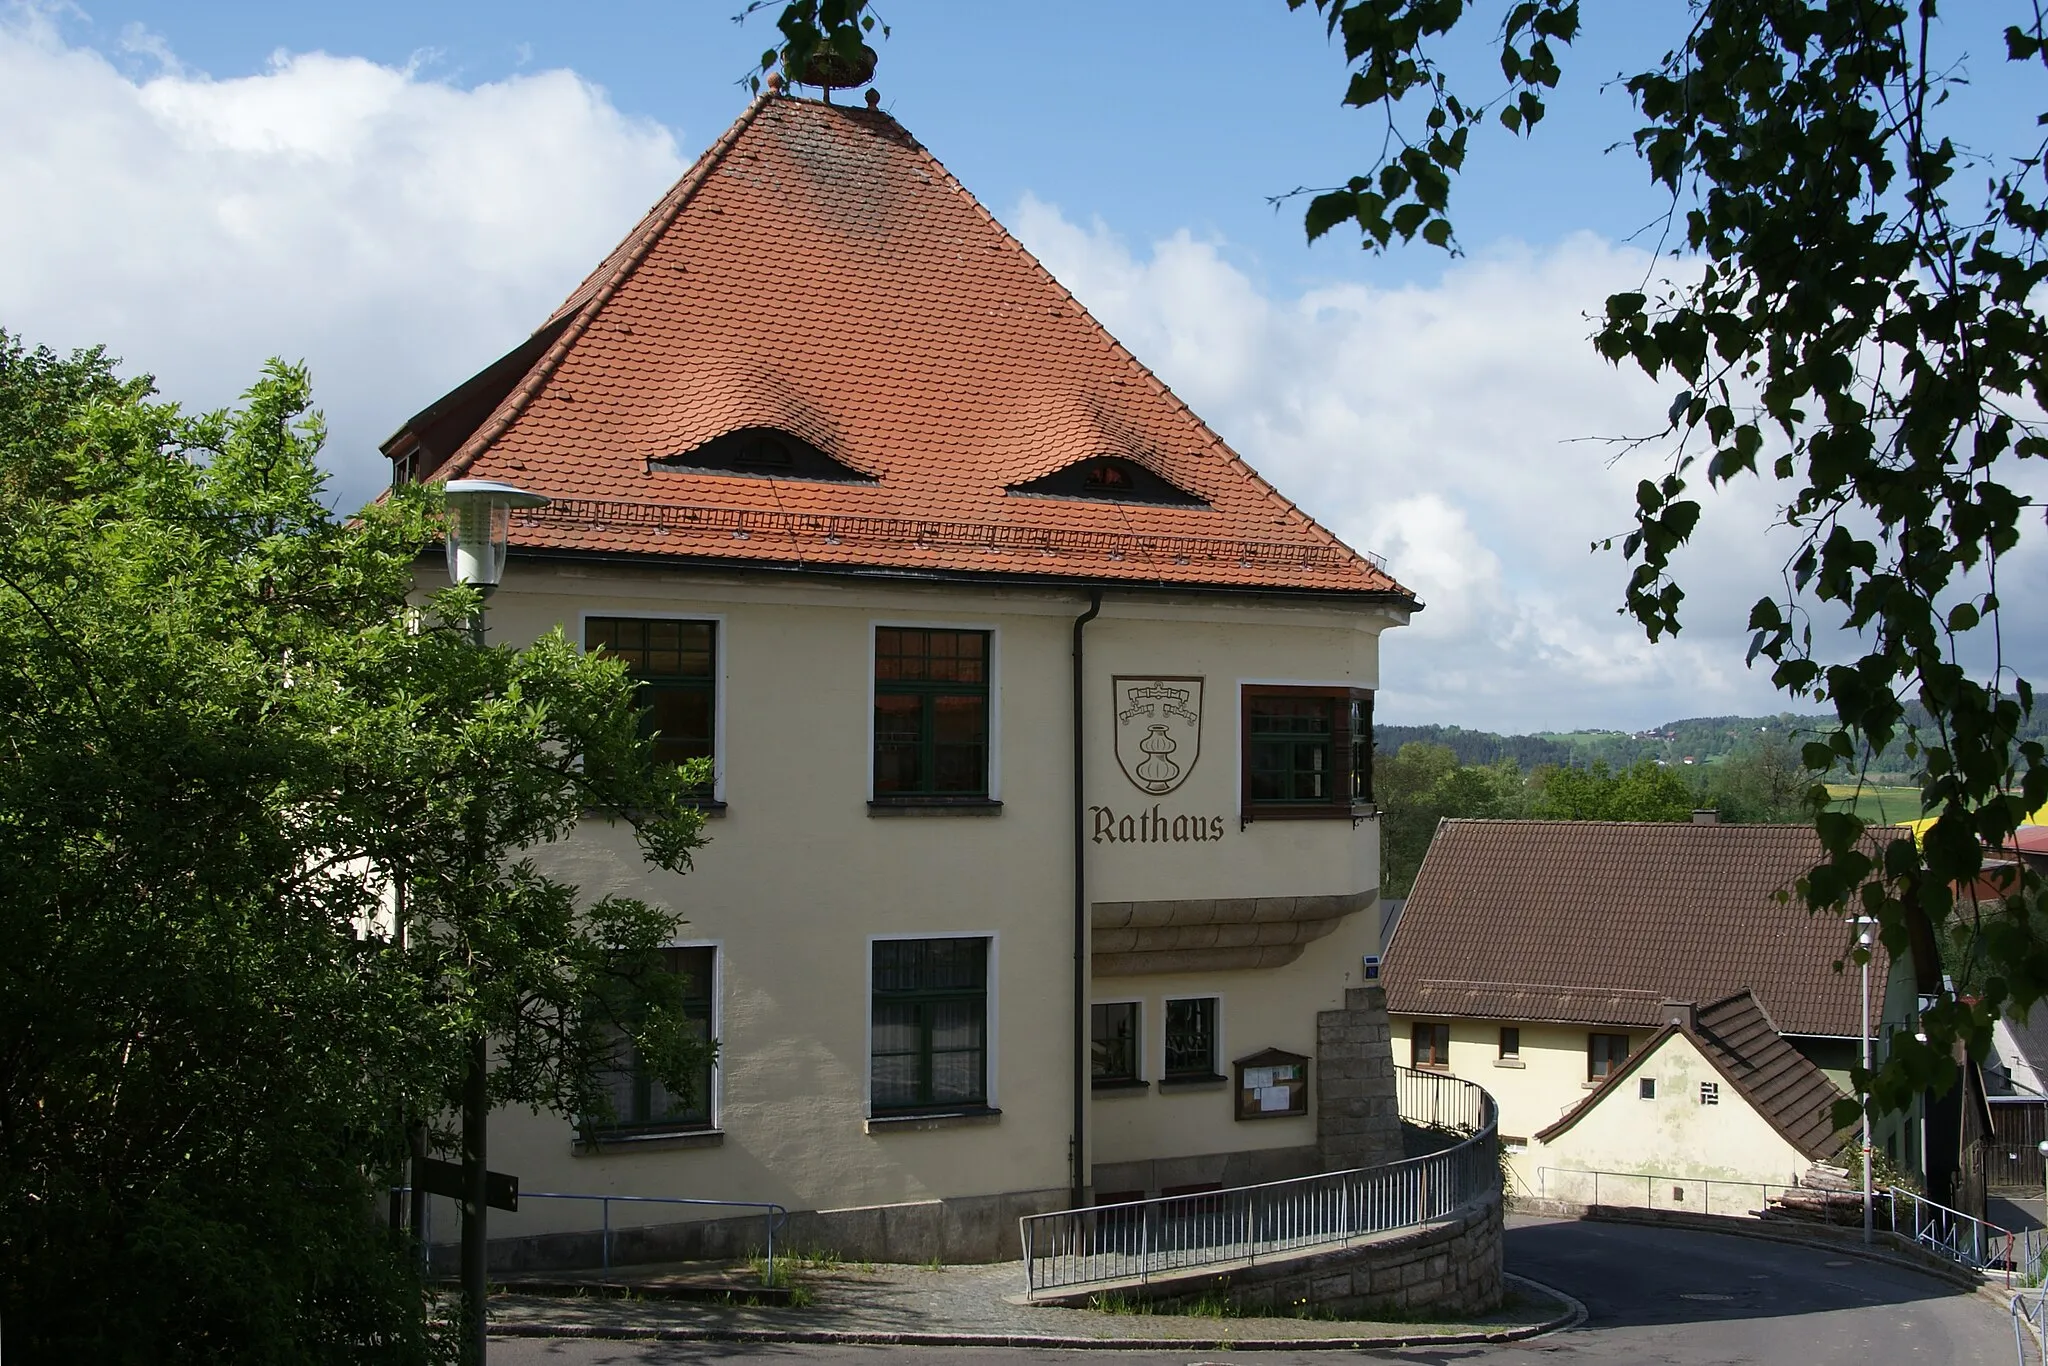 Photo showing: Pullenreuth, town hall and former school